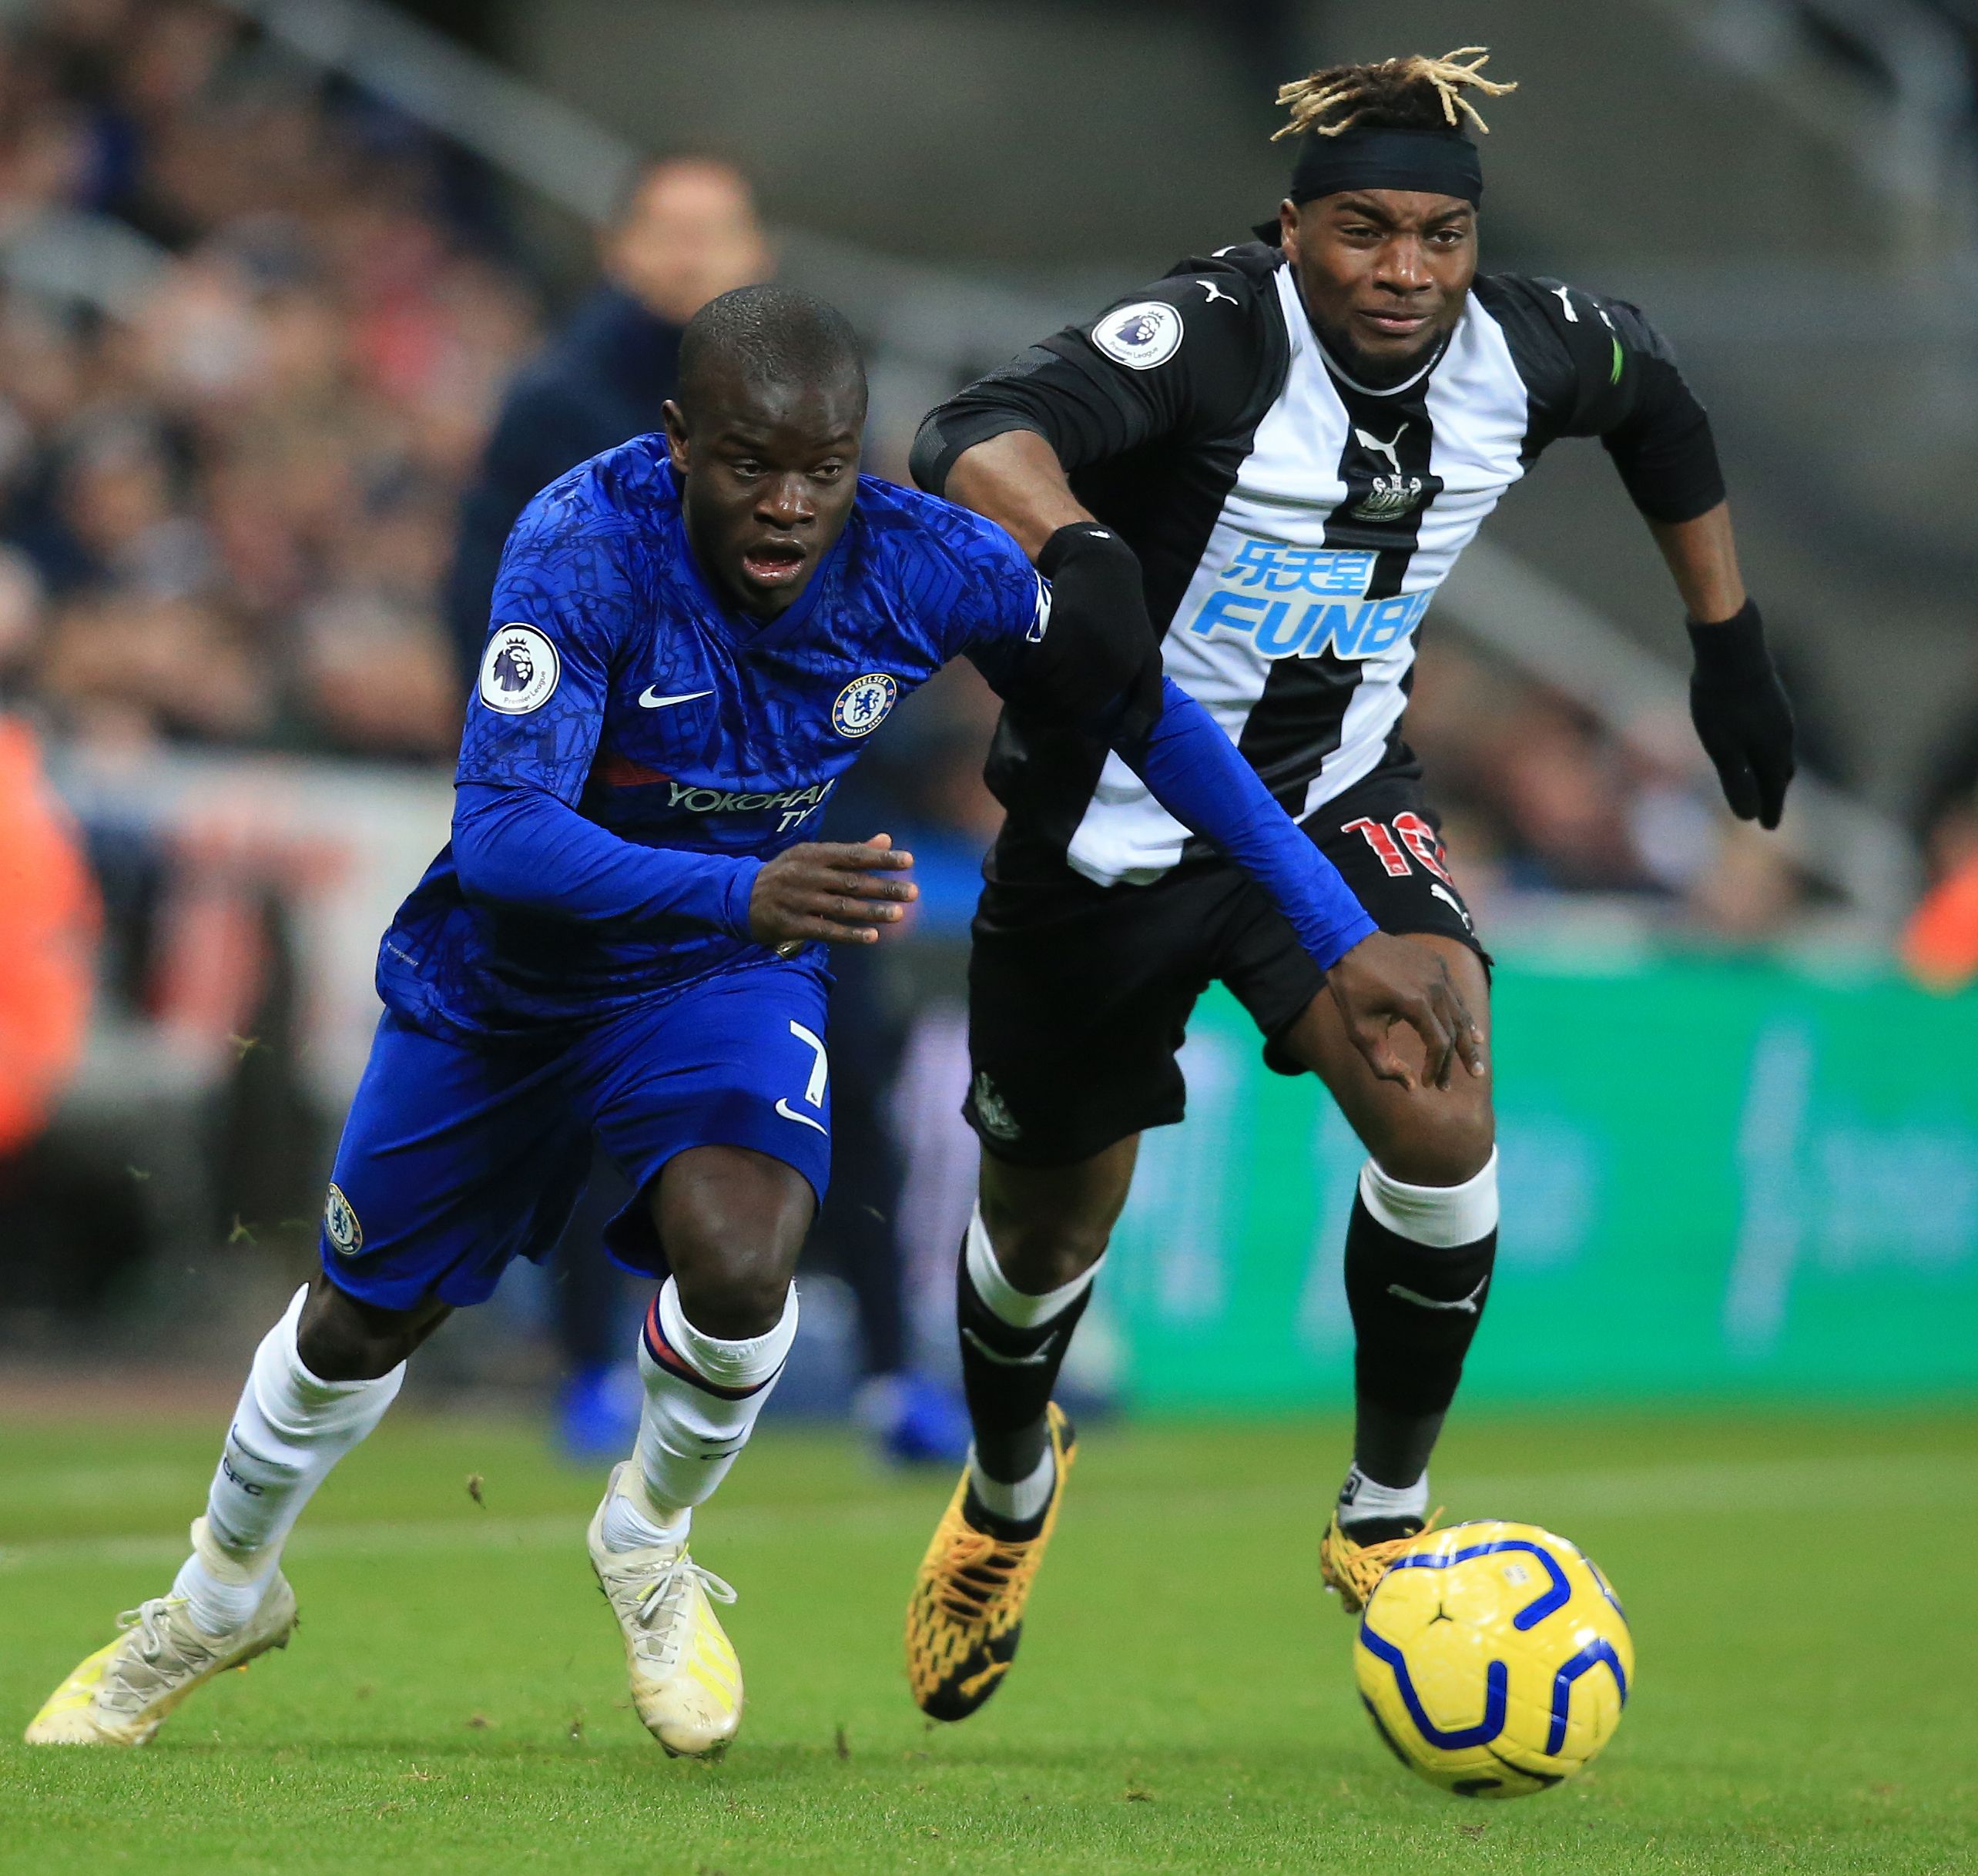 Allan Saint-Maximin will pose a major threat to the Leeds defence (Picture Courtesy - AFP/Getty Images)